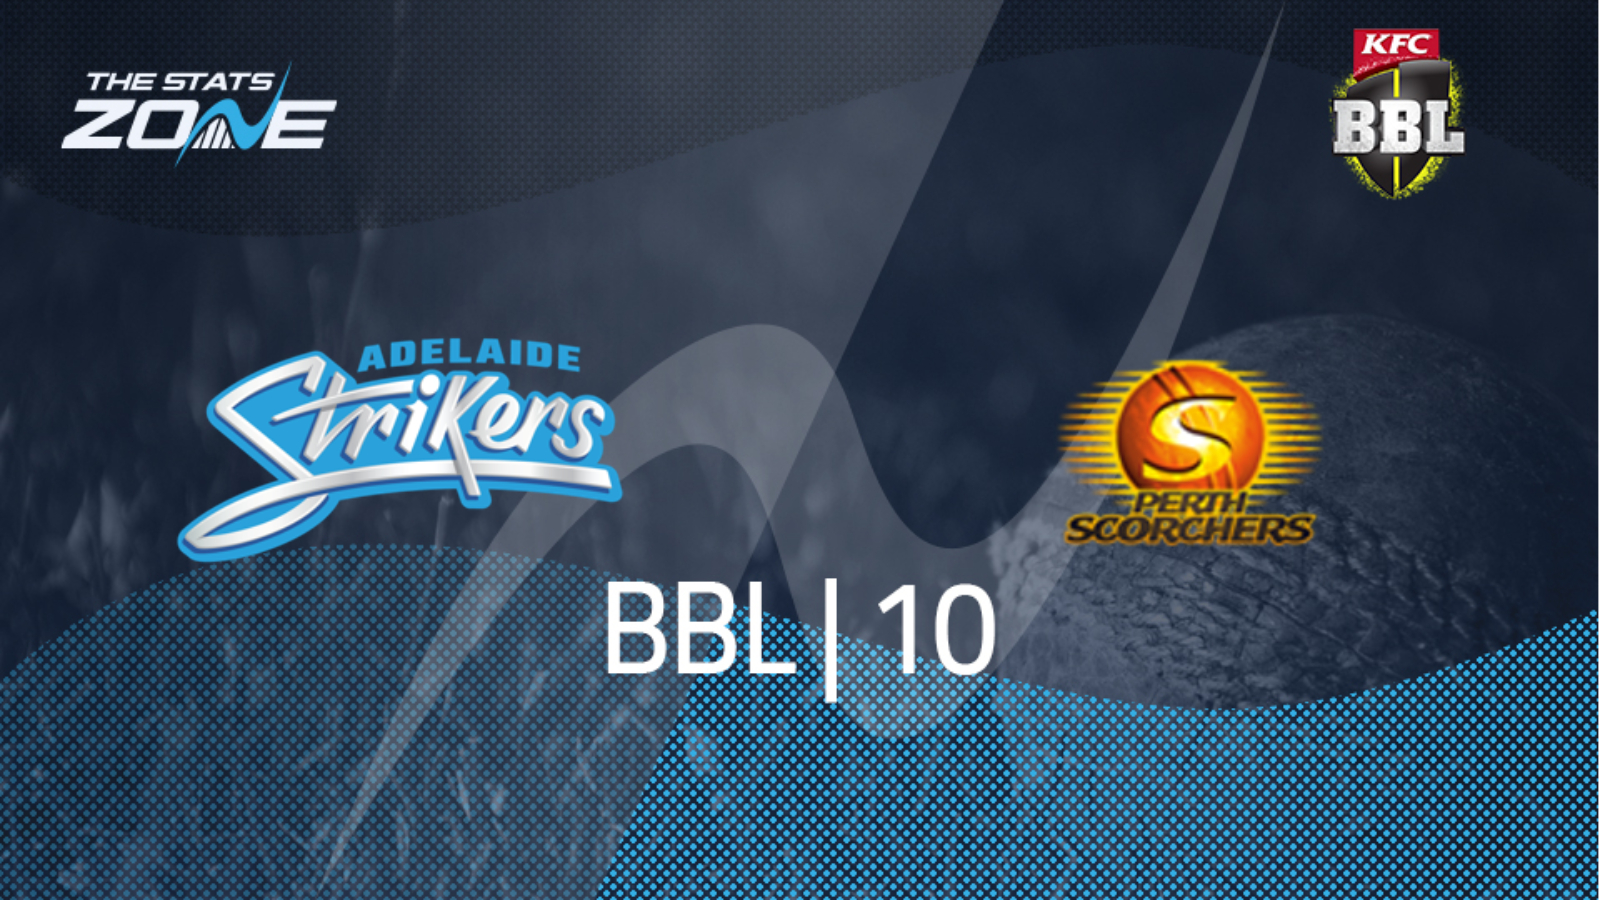 Adelaide strikers vs perth scorchers betting tips biggest online gambling company